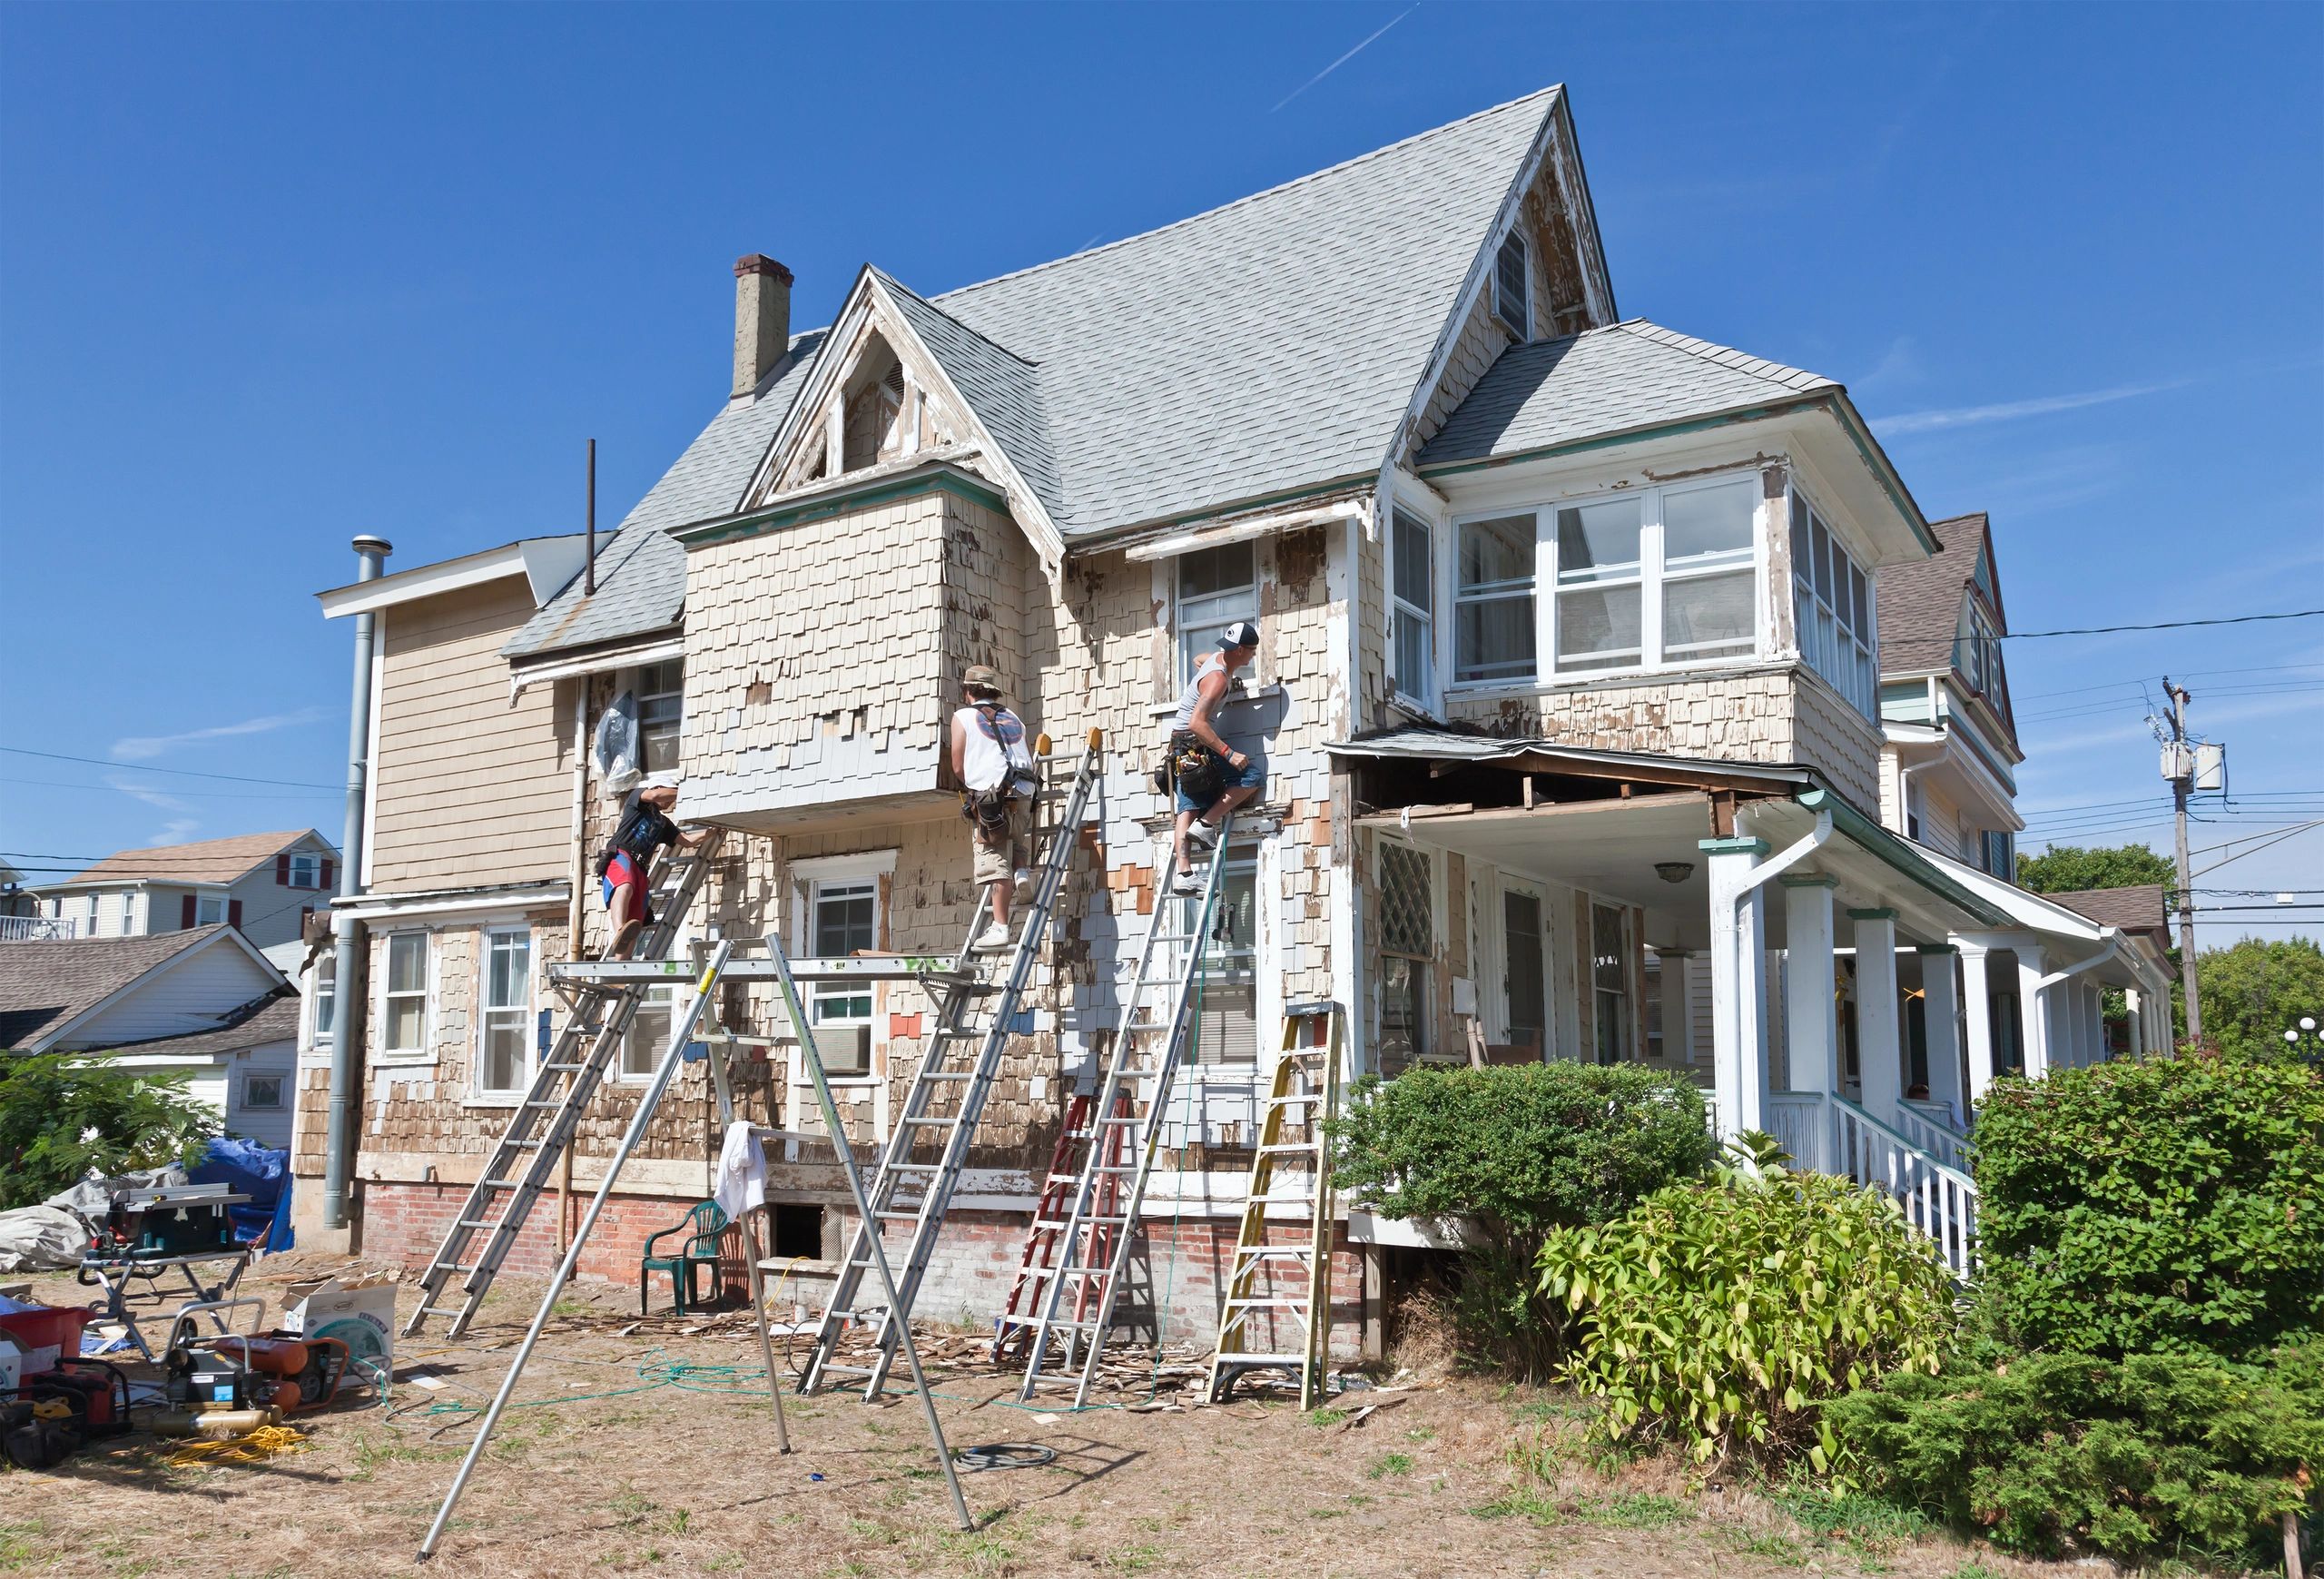 Will Your Dream Home Be a Renovation or New Construction? What are the Options? Are You Selling?